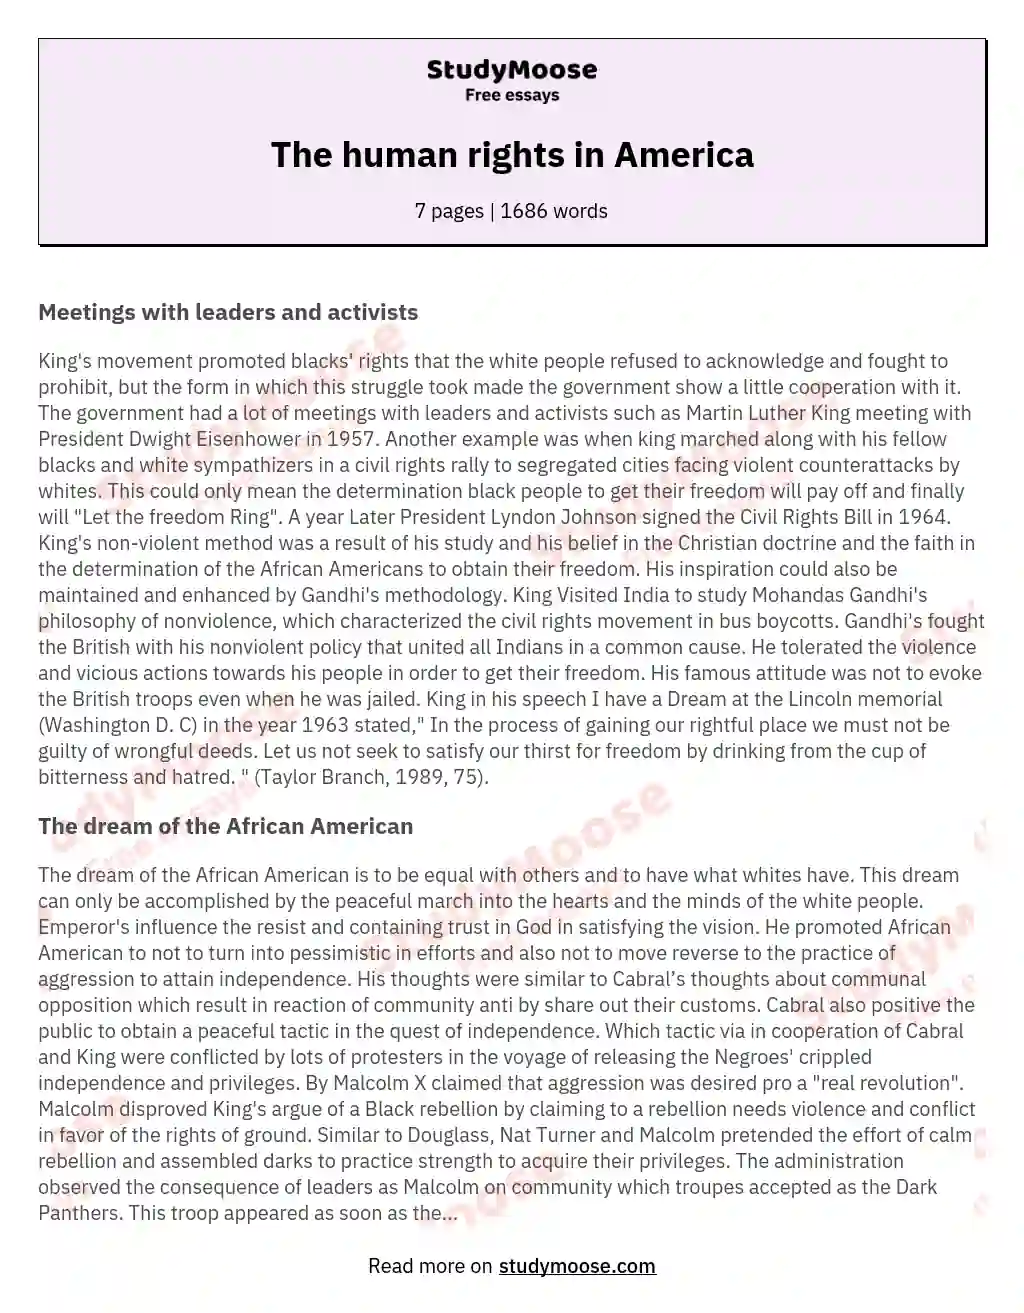 The human rights in America